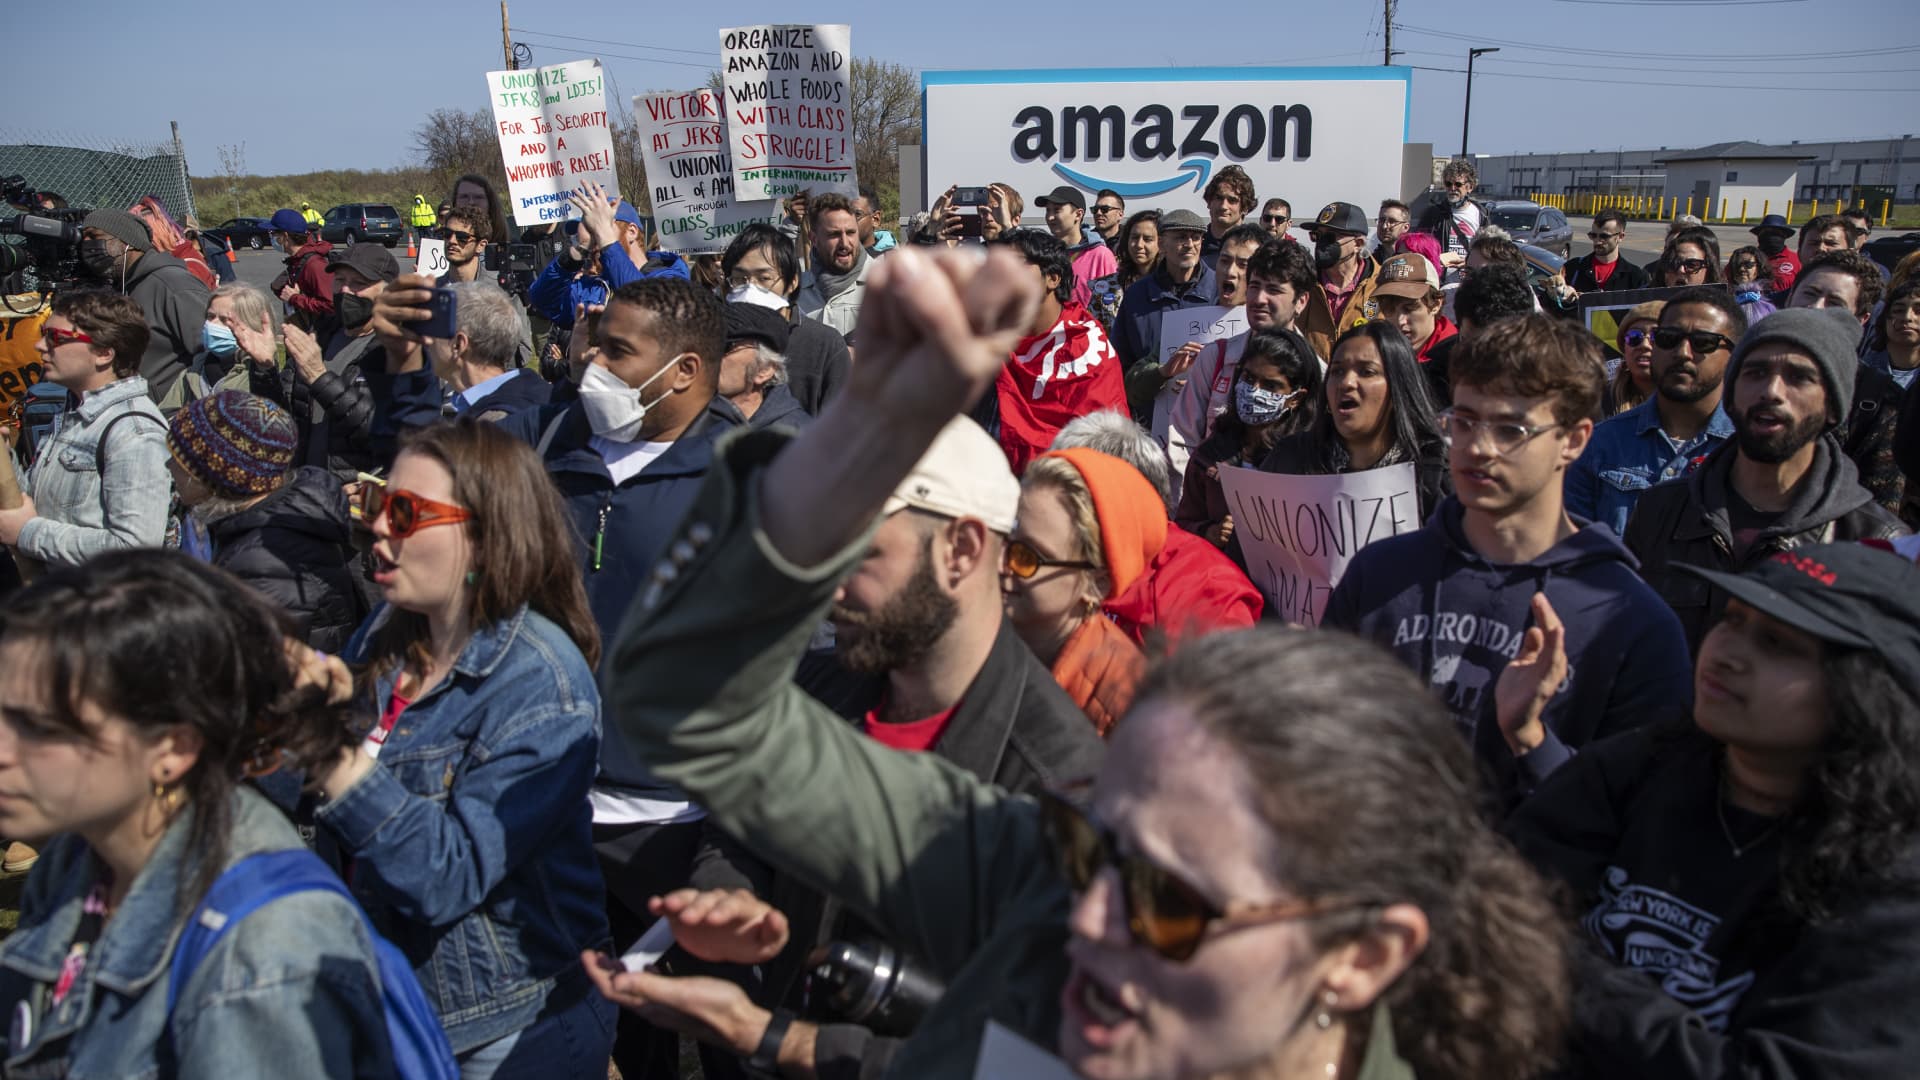 Amazon broke federal labor law by calling Staten Island union organizers 'thugs,' interrogating workers